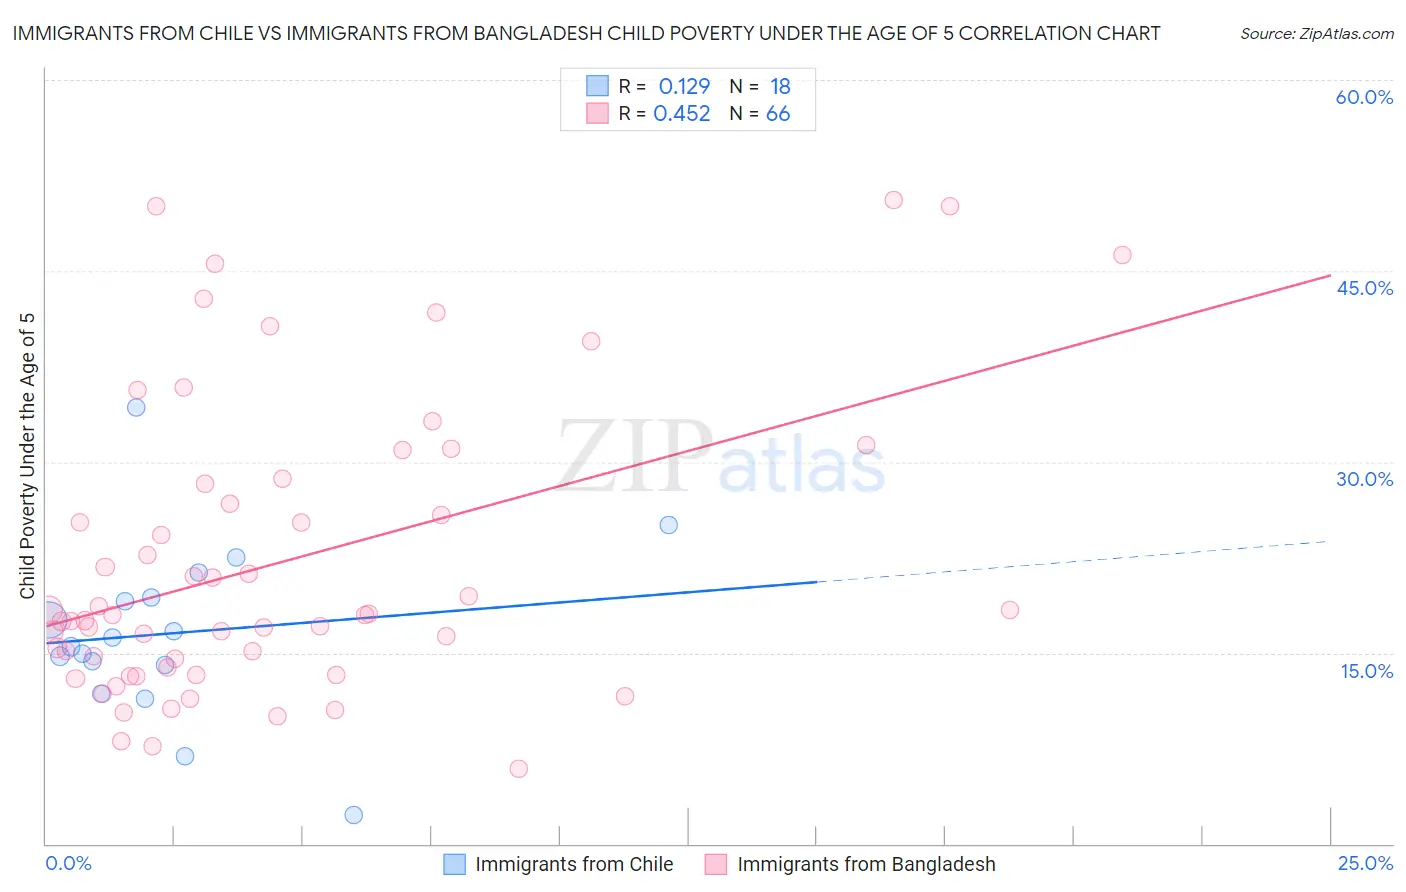 Immigrants from Chile vs Immigrants from Bangladesh Child Poverty Under the Age of 5